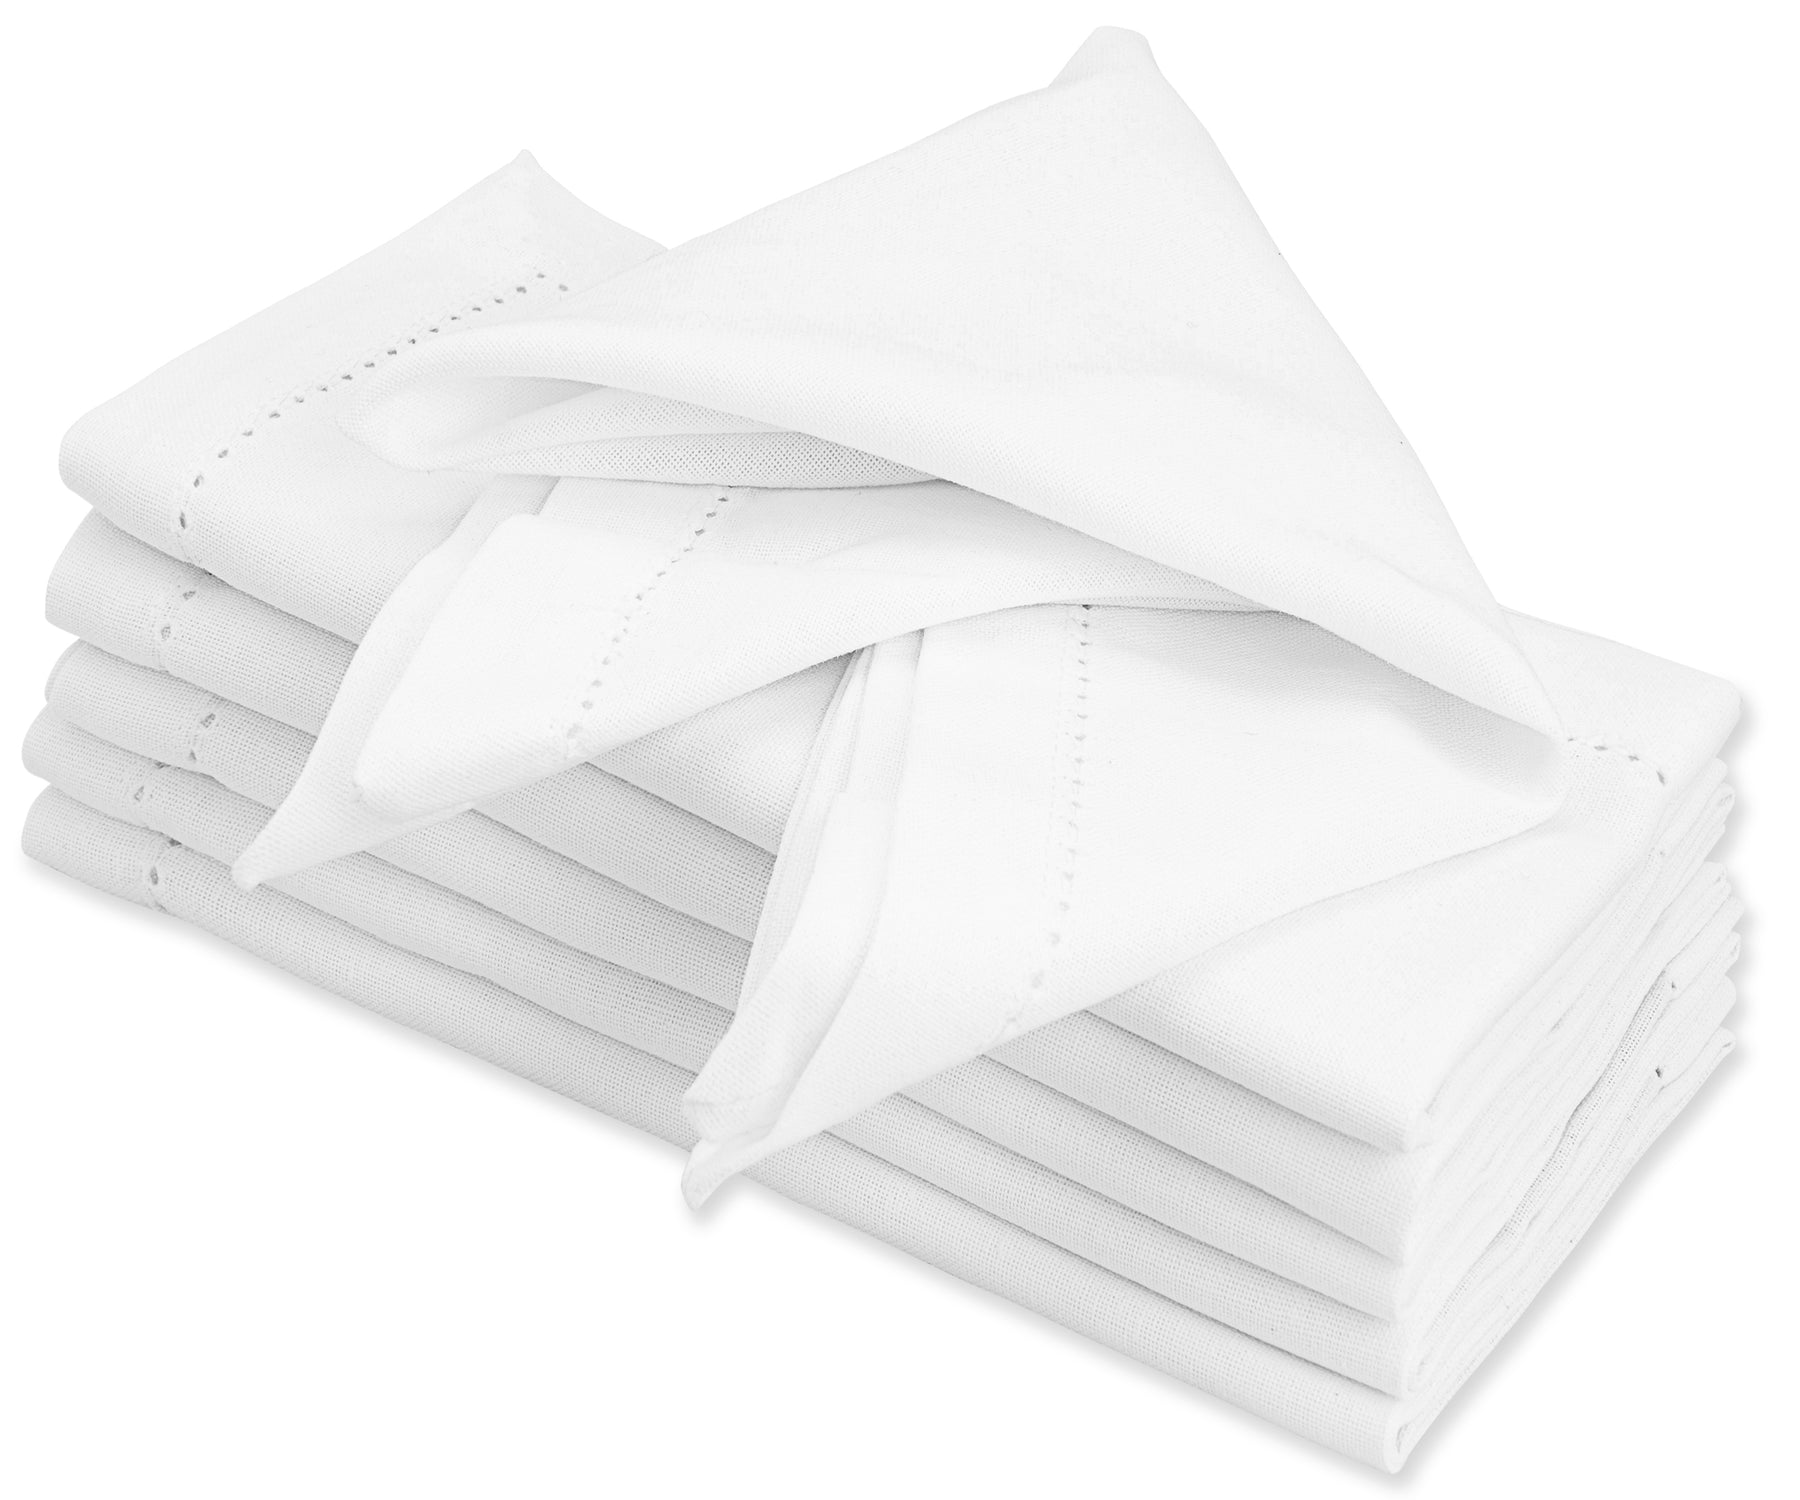 Combine elegance and trend with our chic White Hemstitch Napkins.